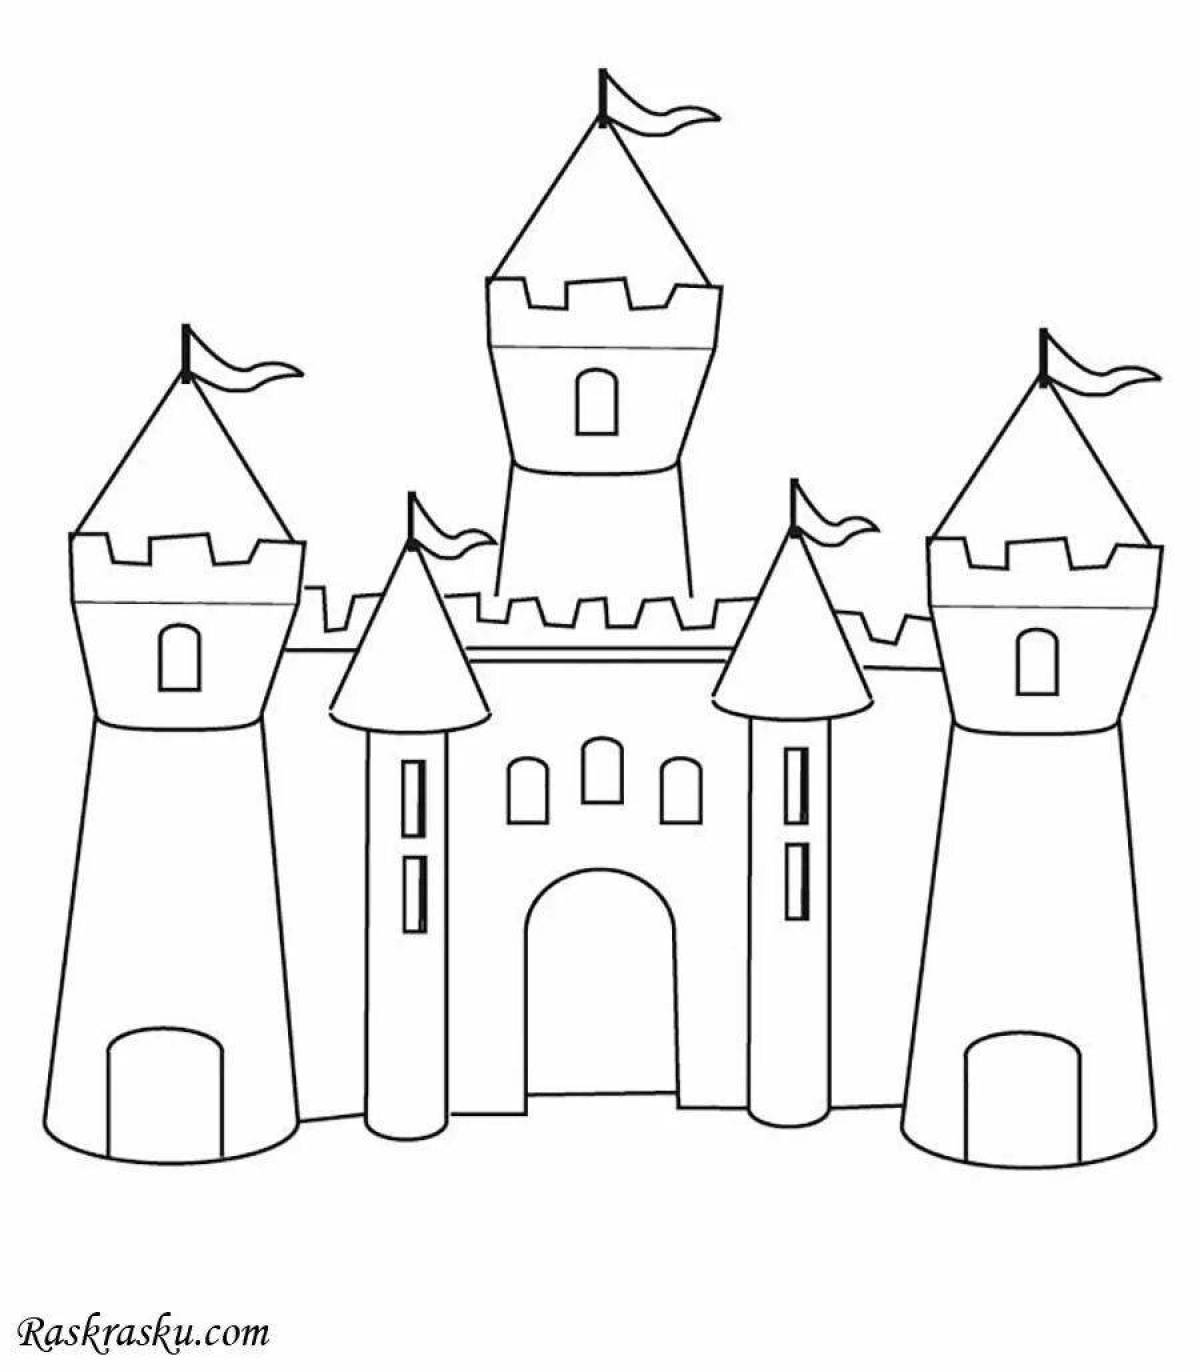 Luxury castle coloring book for children 4-5 years old